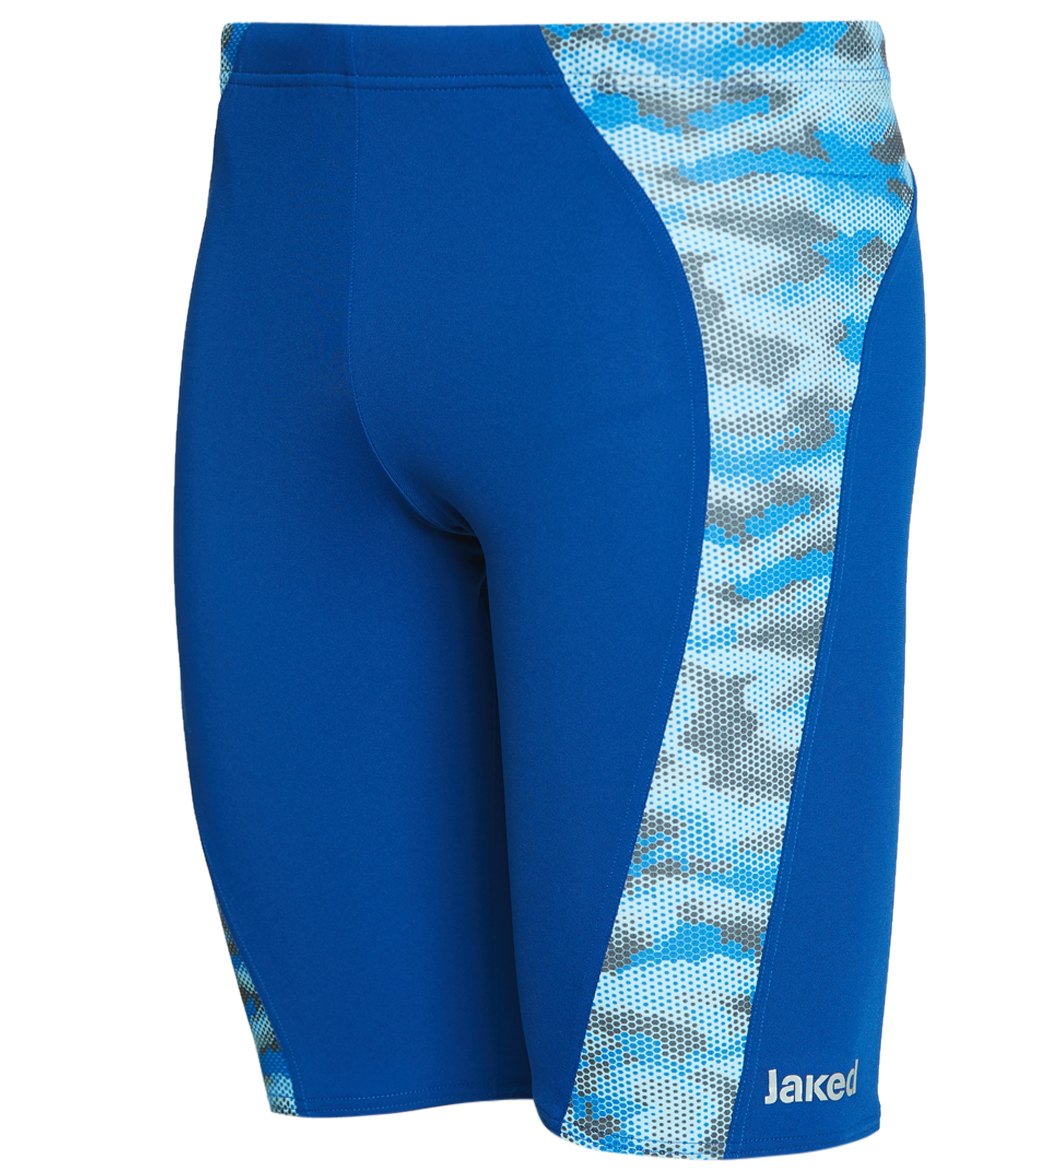 Jaked Men's Pixie Jammer Swimsuit at SwimOutlet.com - Free Shipping